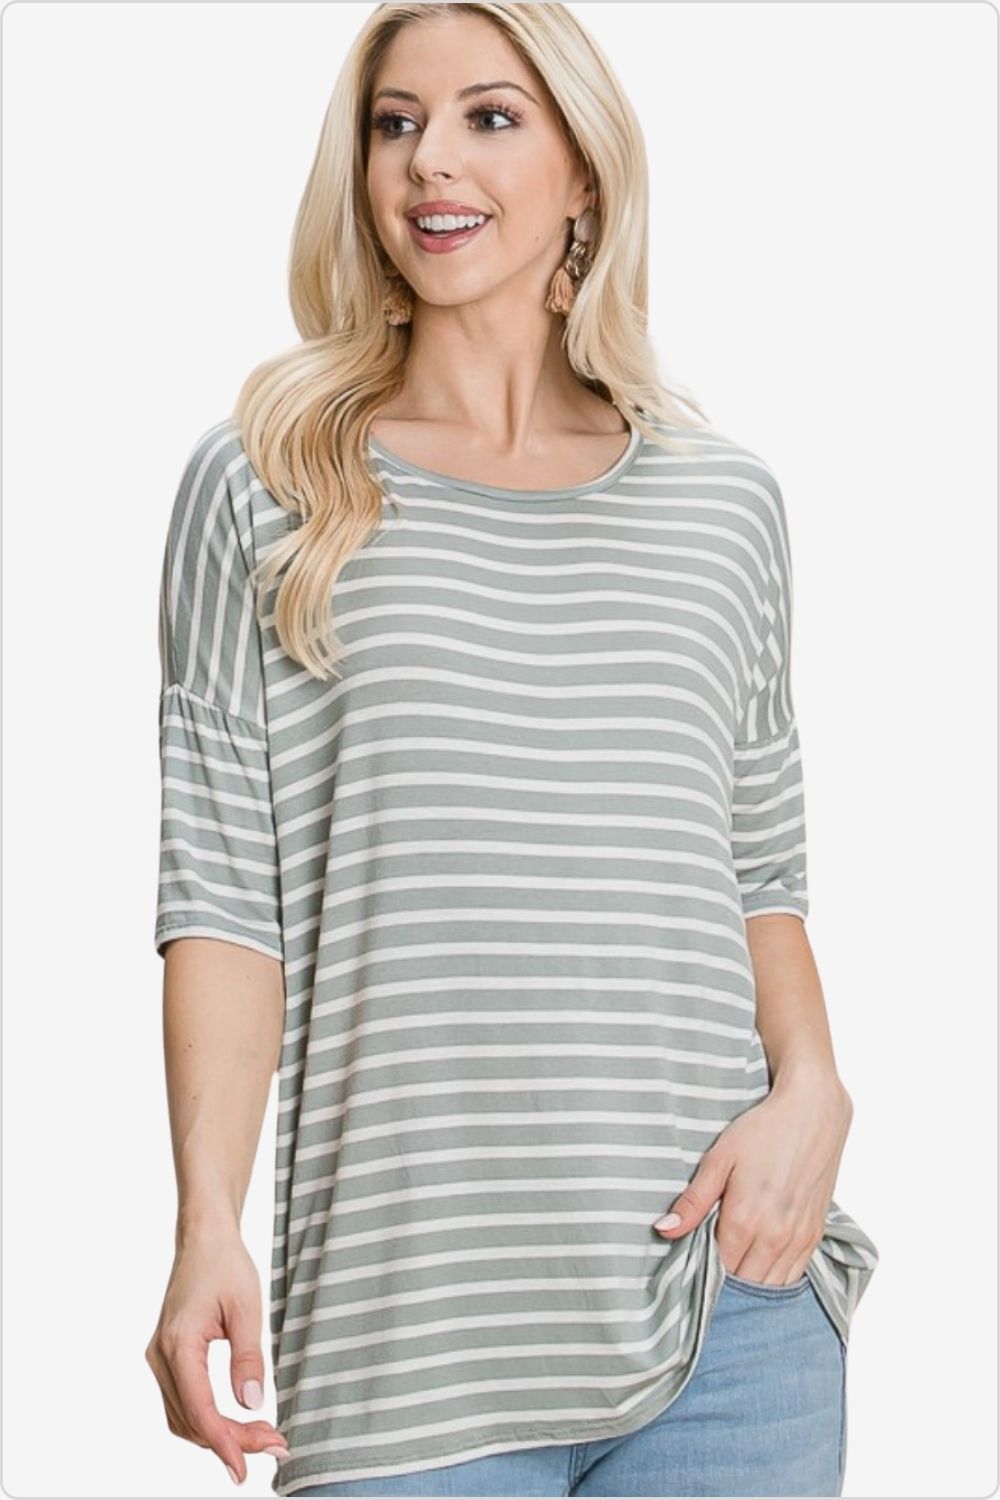 Fashionable woman in a classic striped round neck t-shirt, perfect for versatile outfits, Color Sage